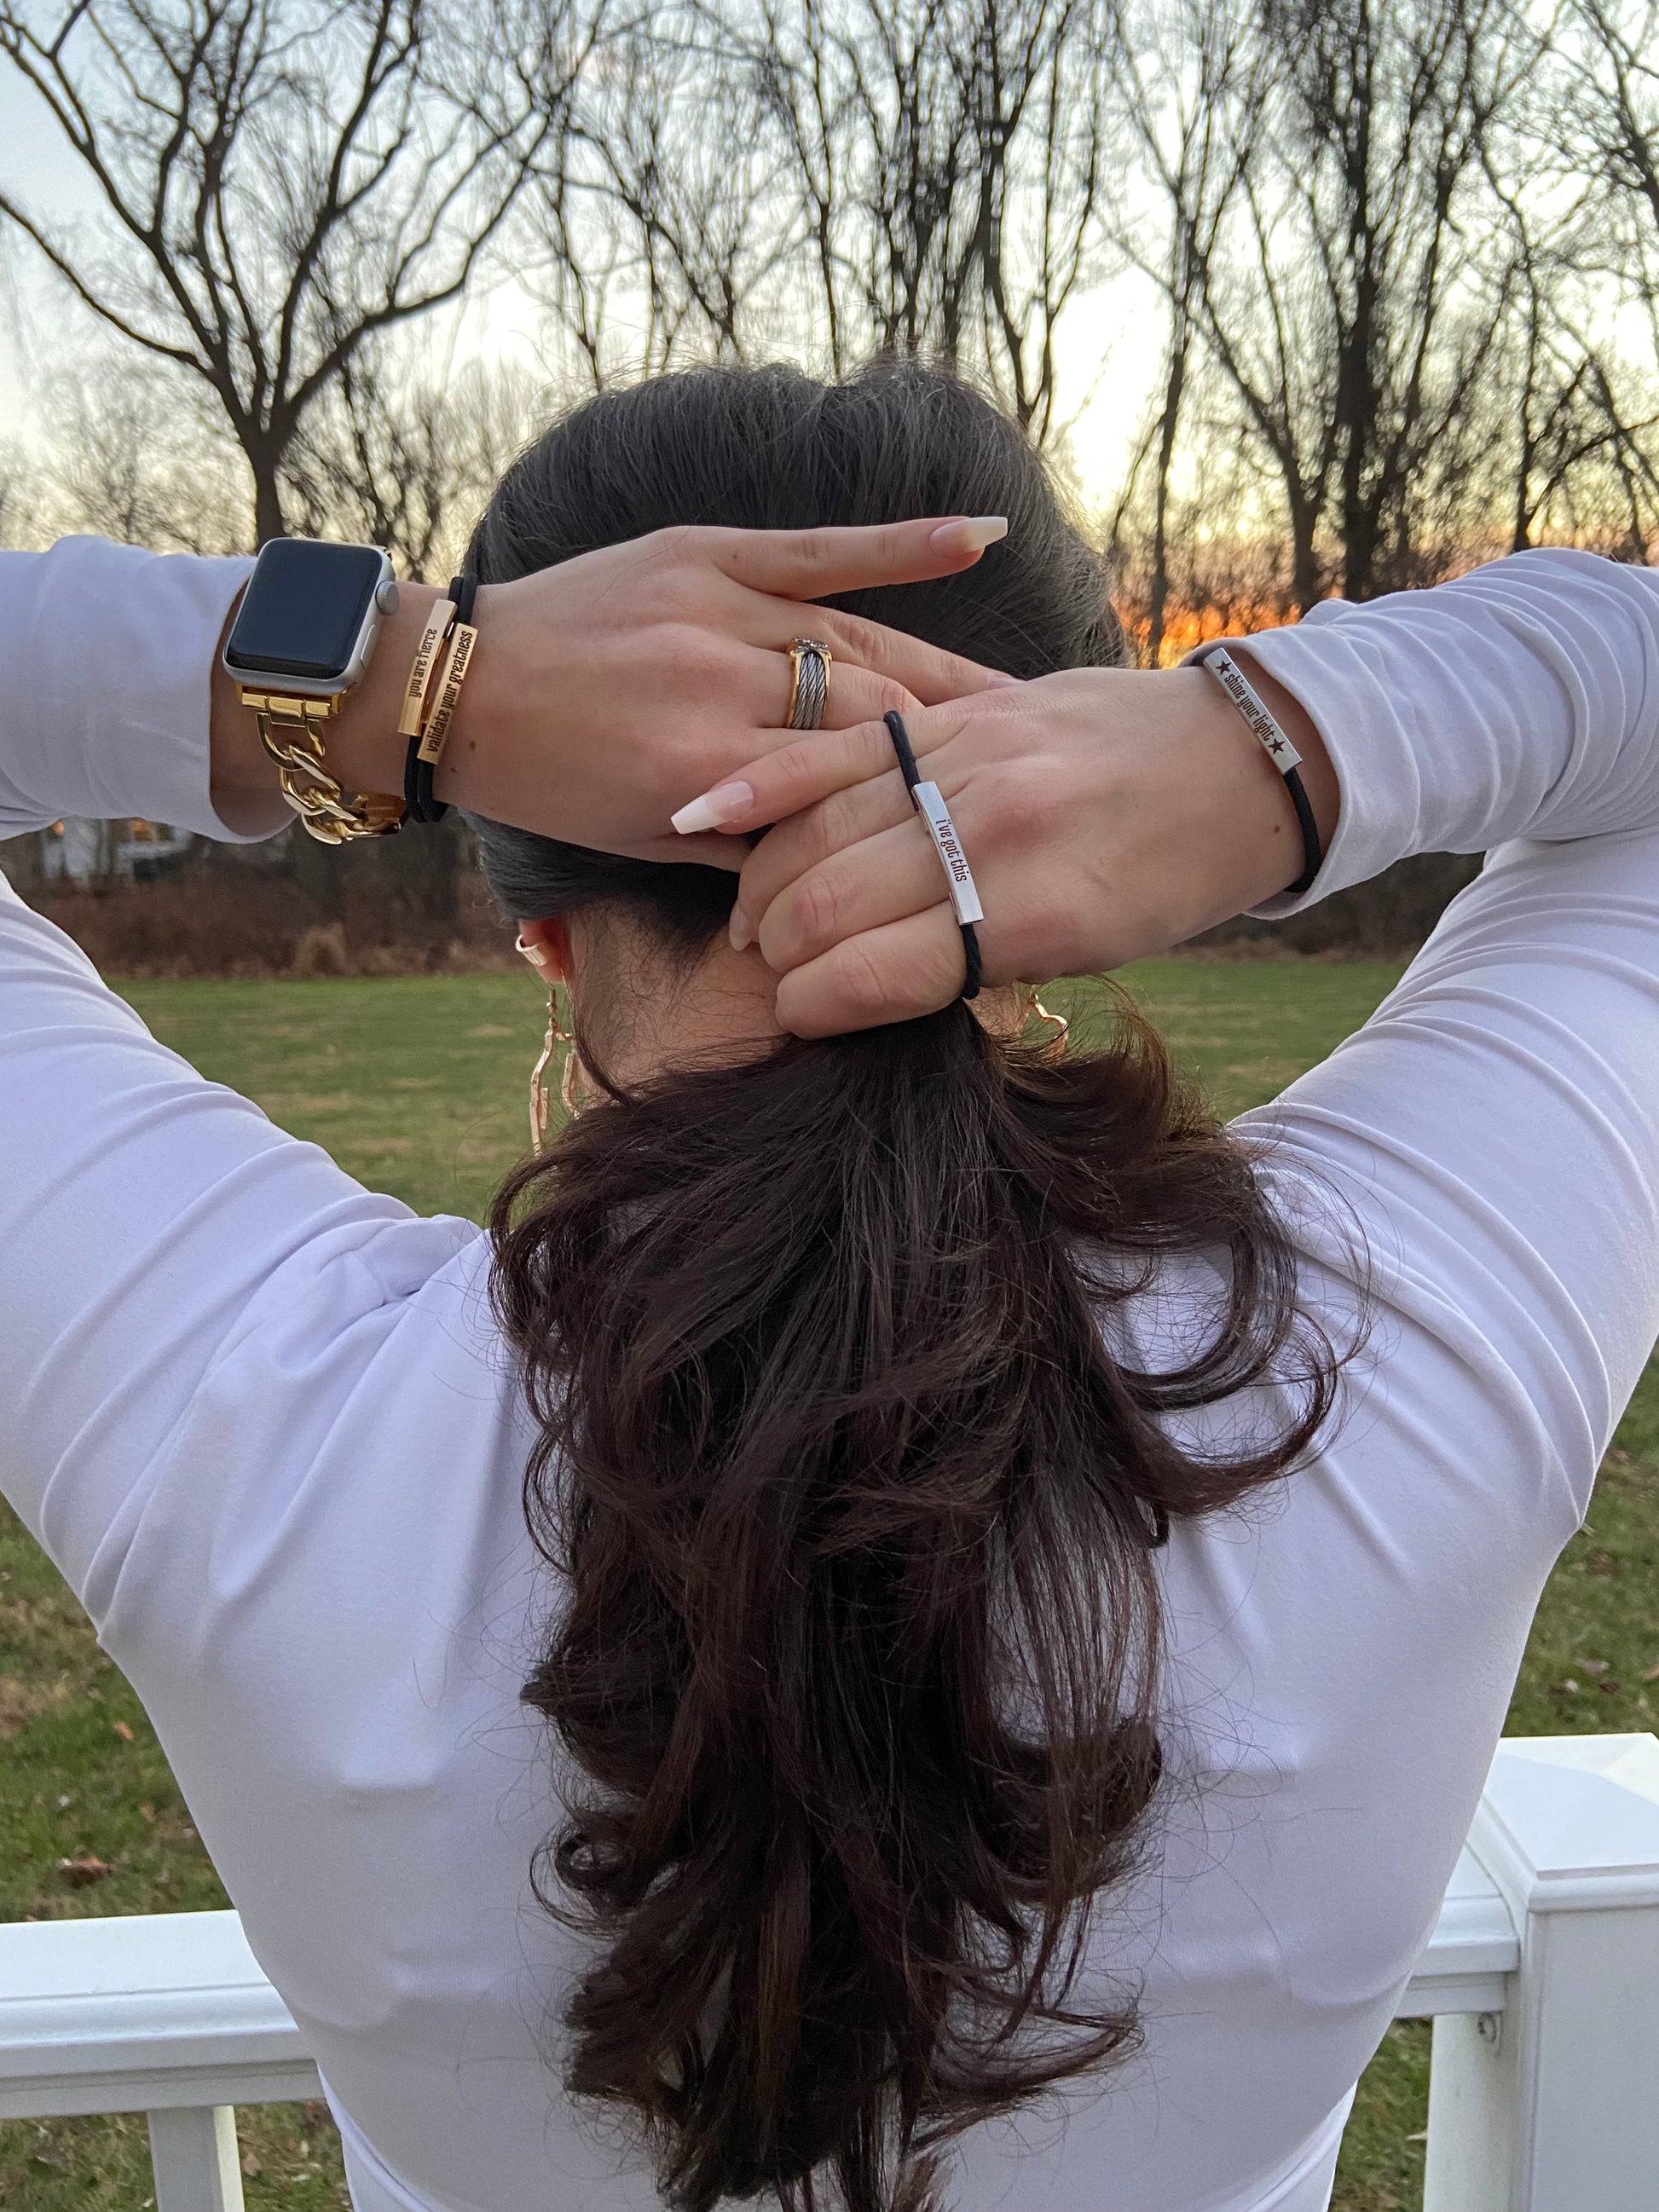 Woman putting her hair in a ponytail using bracelet~hair ties. She is wearing a white shirt and has long nails. Bracelet~hair ties are adorned on her wrists. The hair ties are made of black elastic with a gold or silver engraved bar.